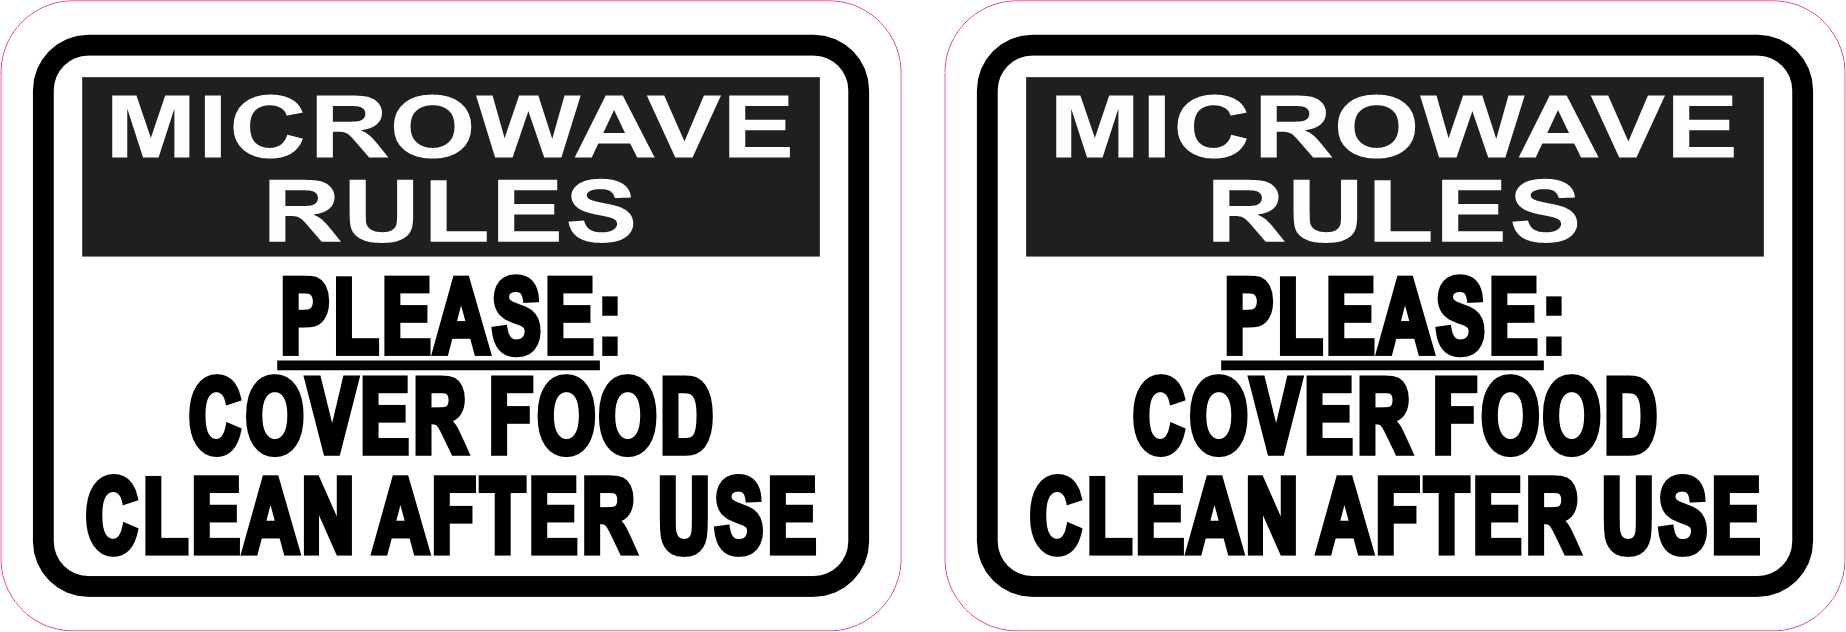 StickerTalk Microwave Rules Vinyl Stickers, 3 Inches x 2 Inches